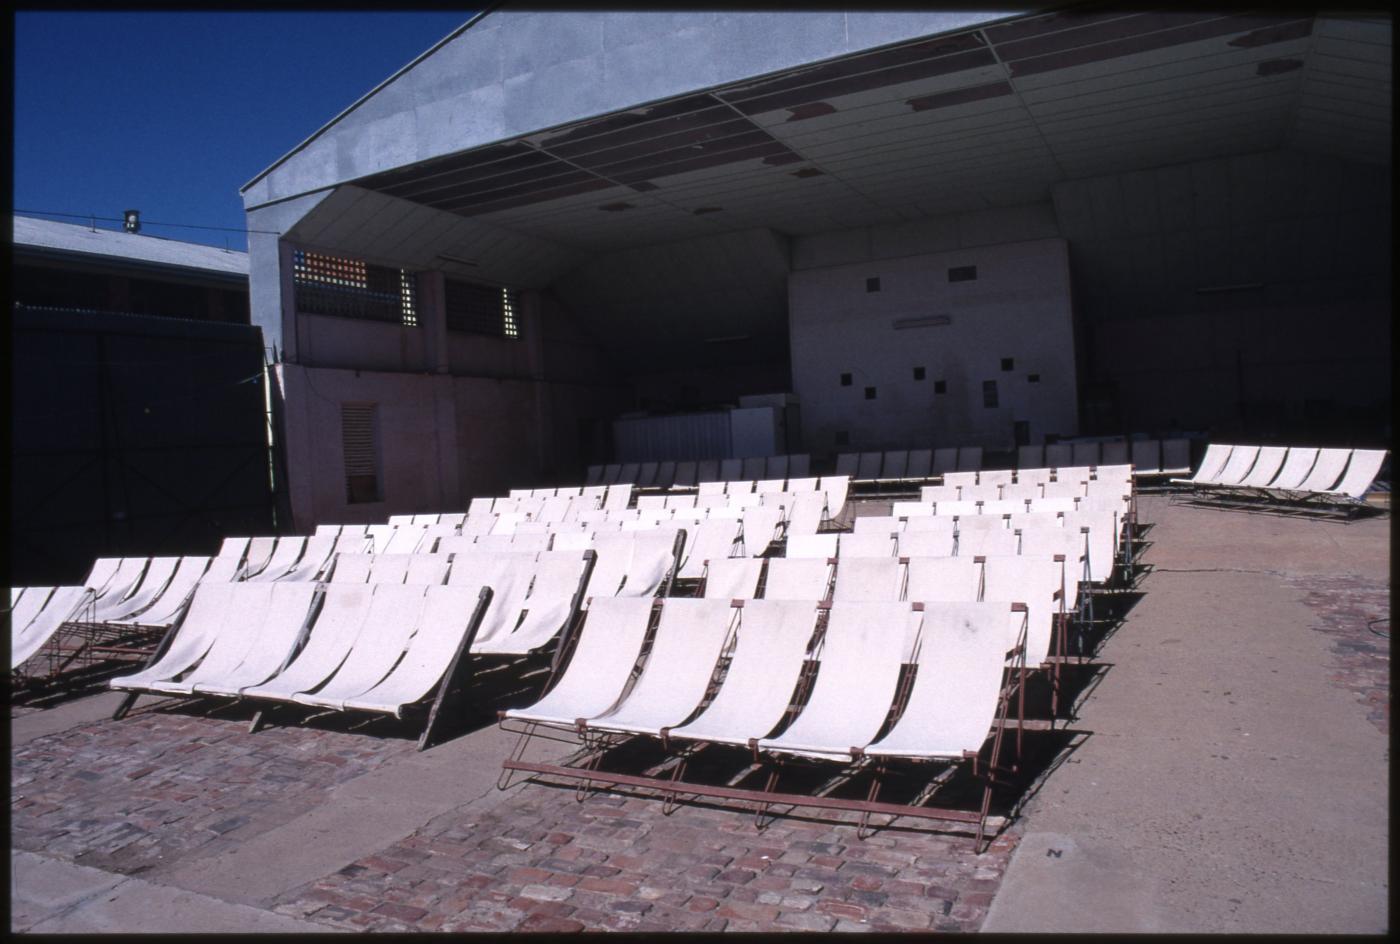 Royal Theatre, Winton - chairs facing the screen